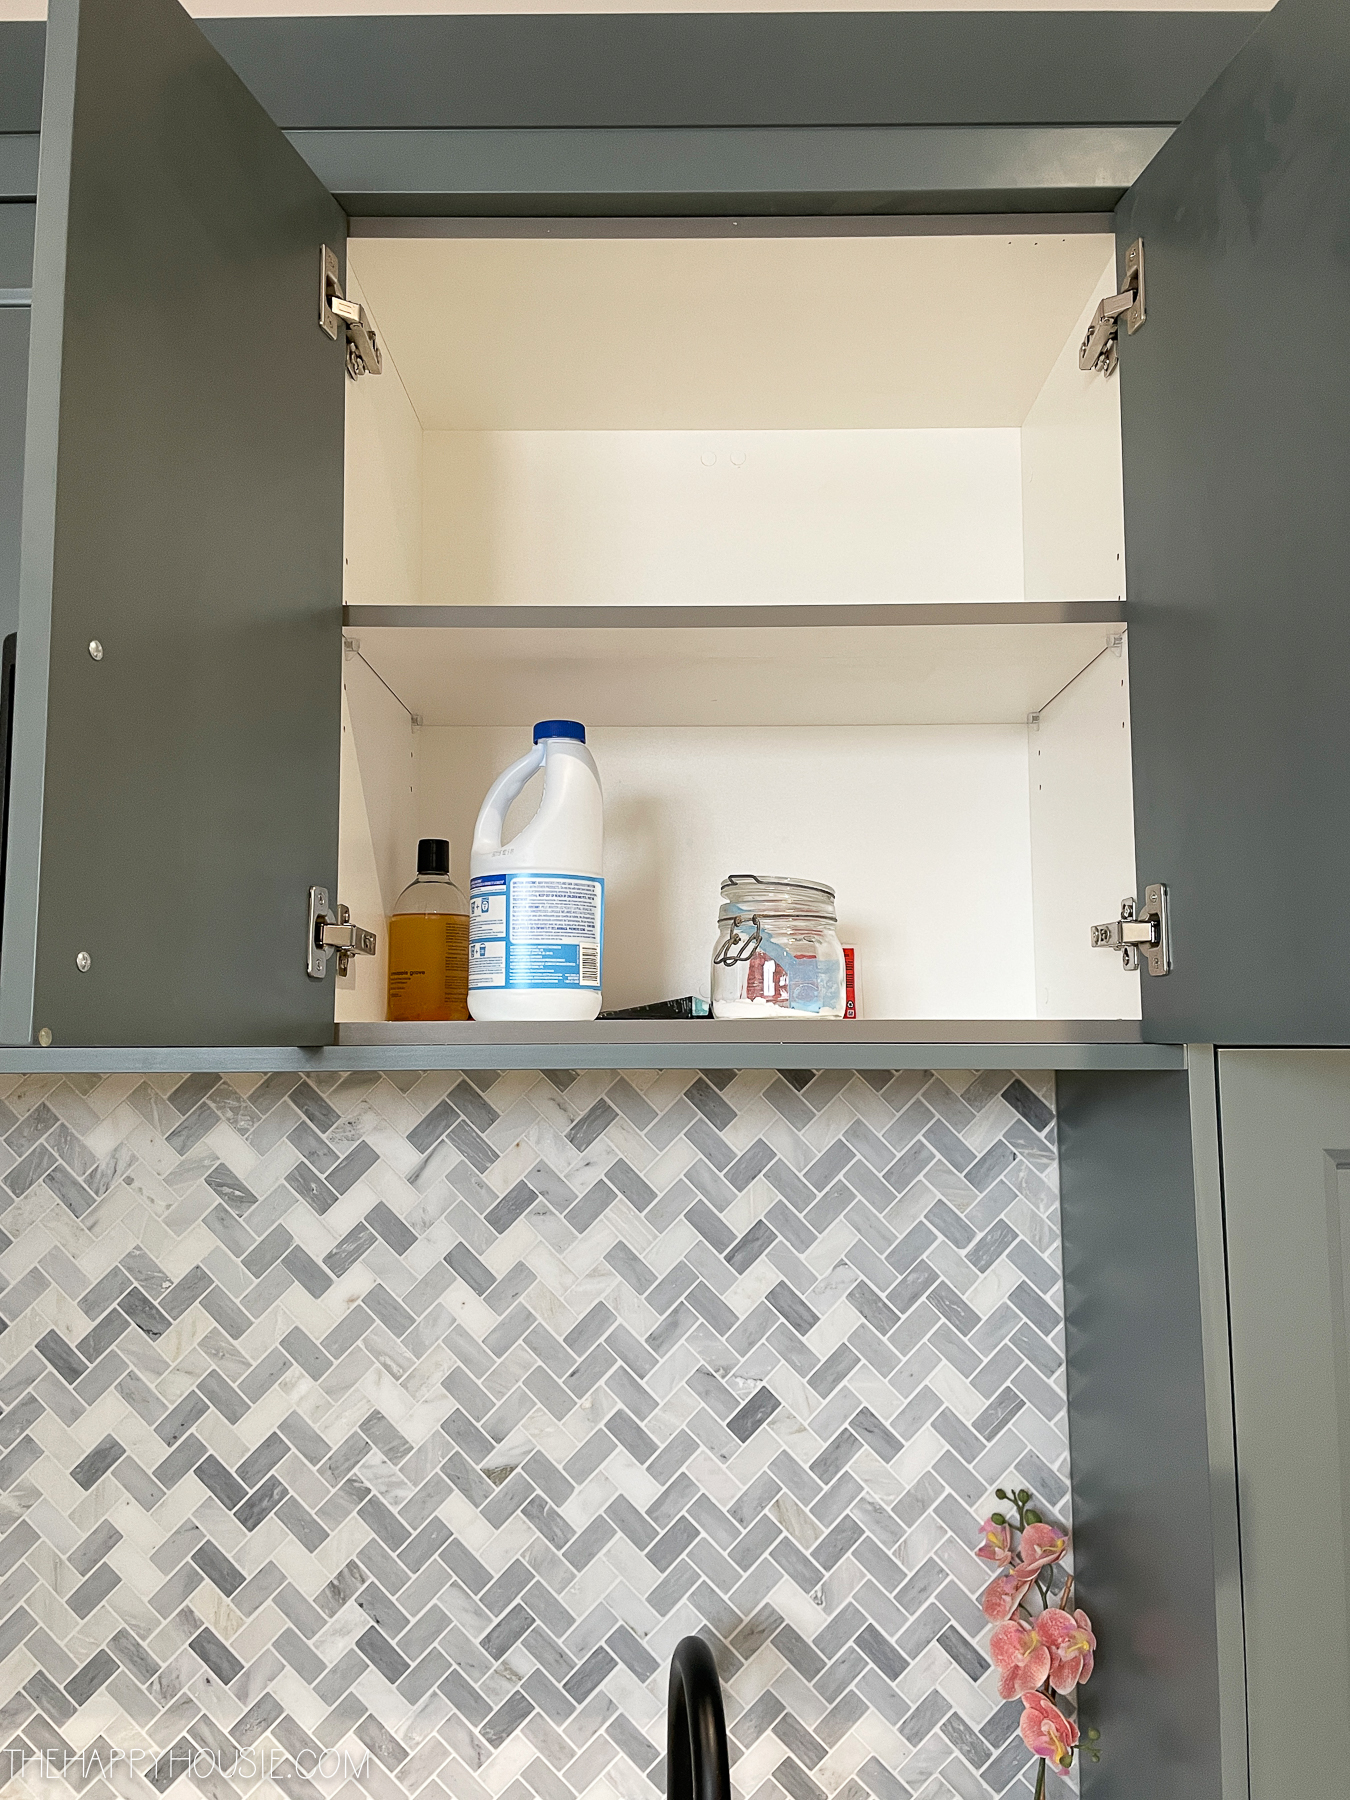 A small cupboard above the sink with a bottle of cleaning supplies.